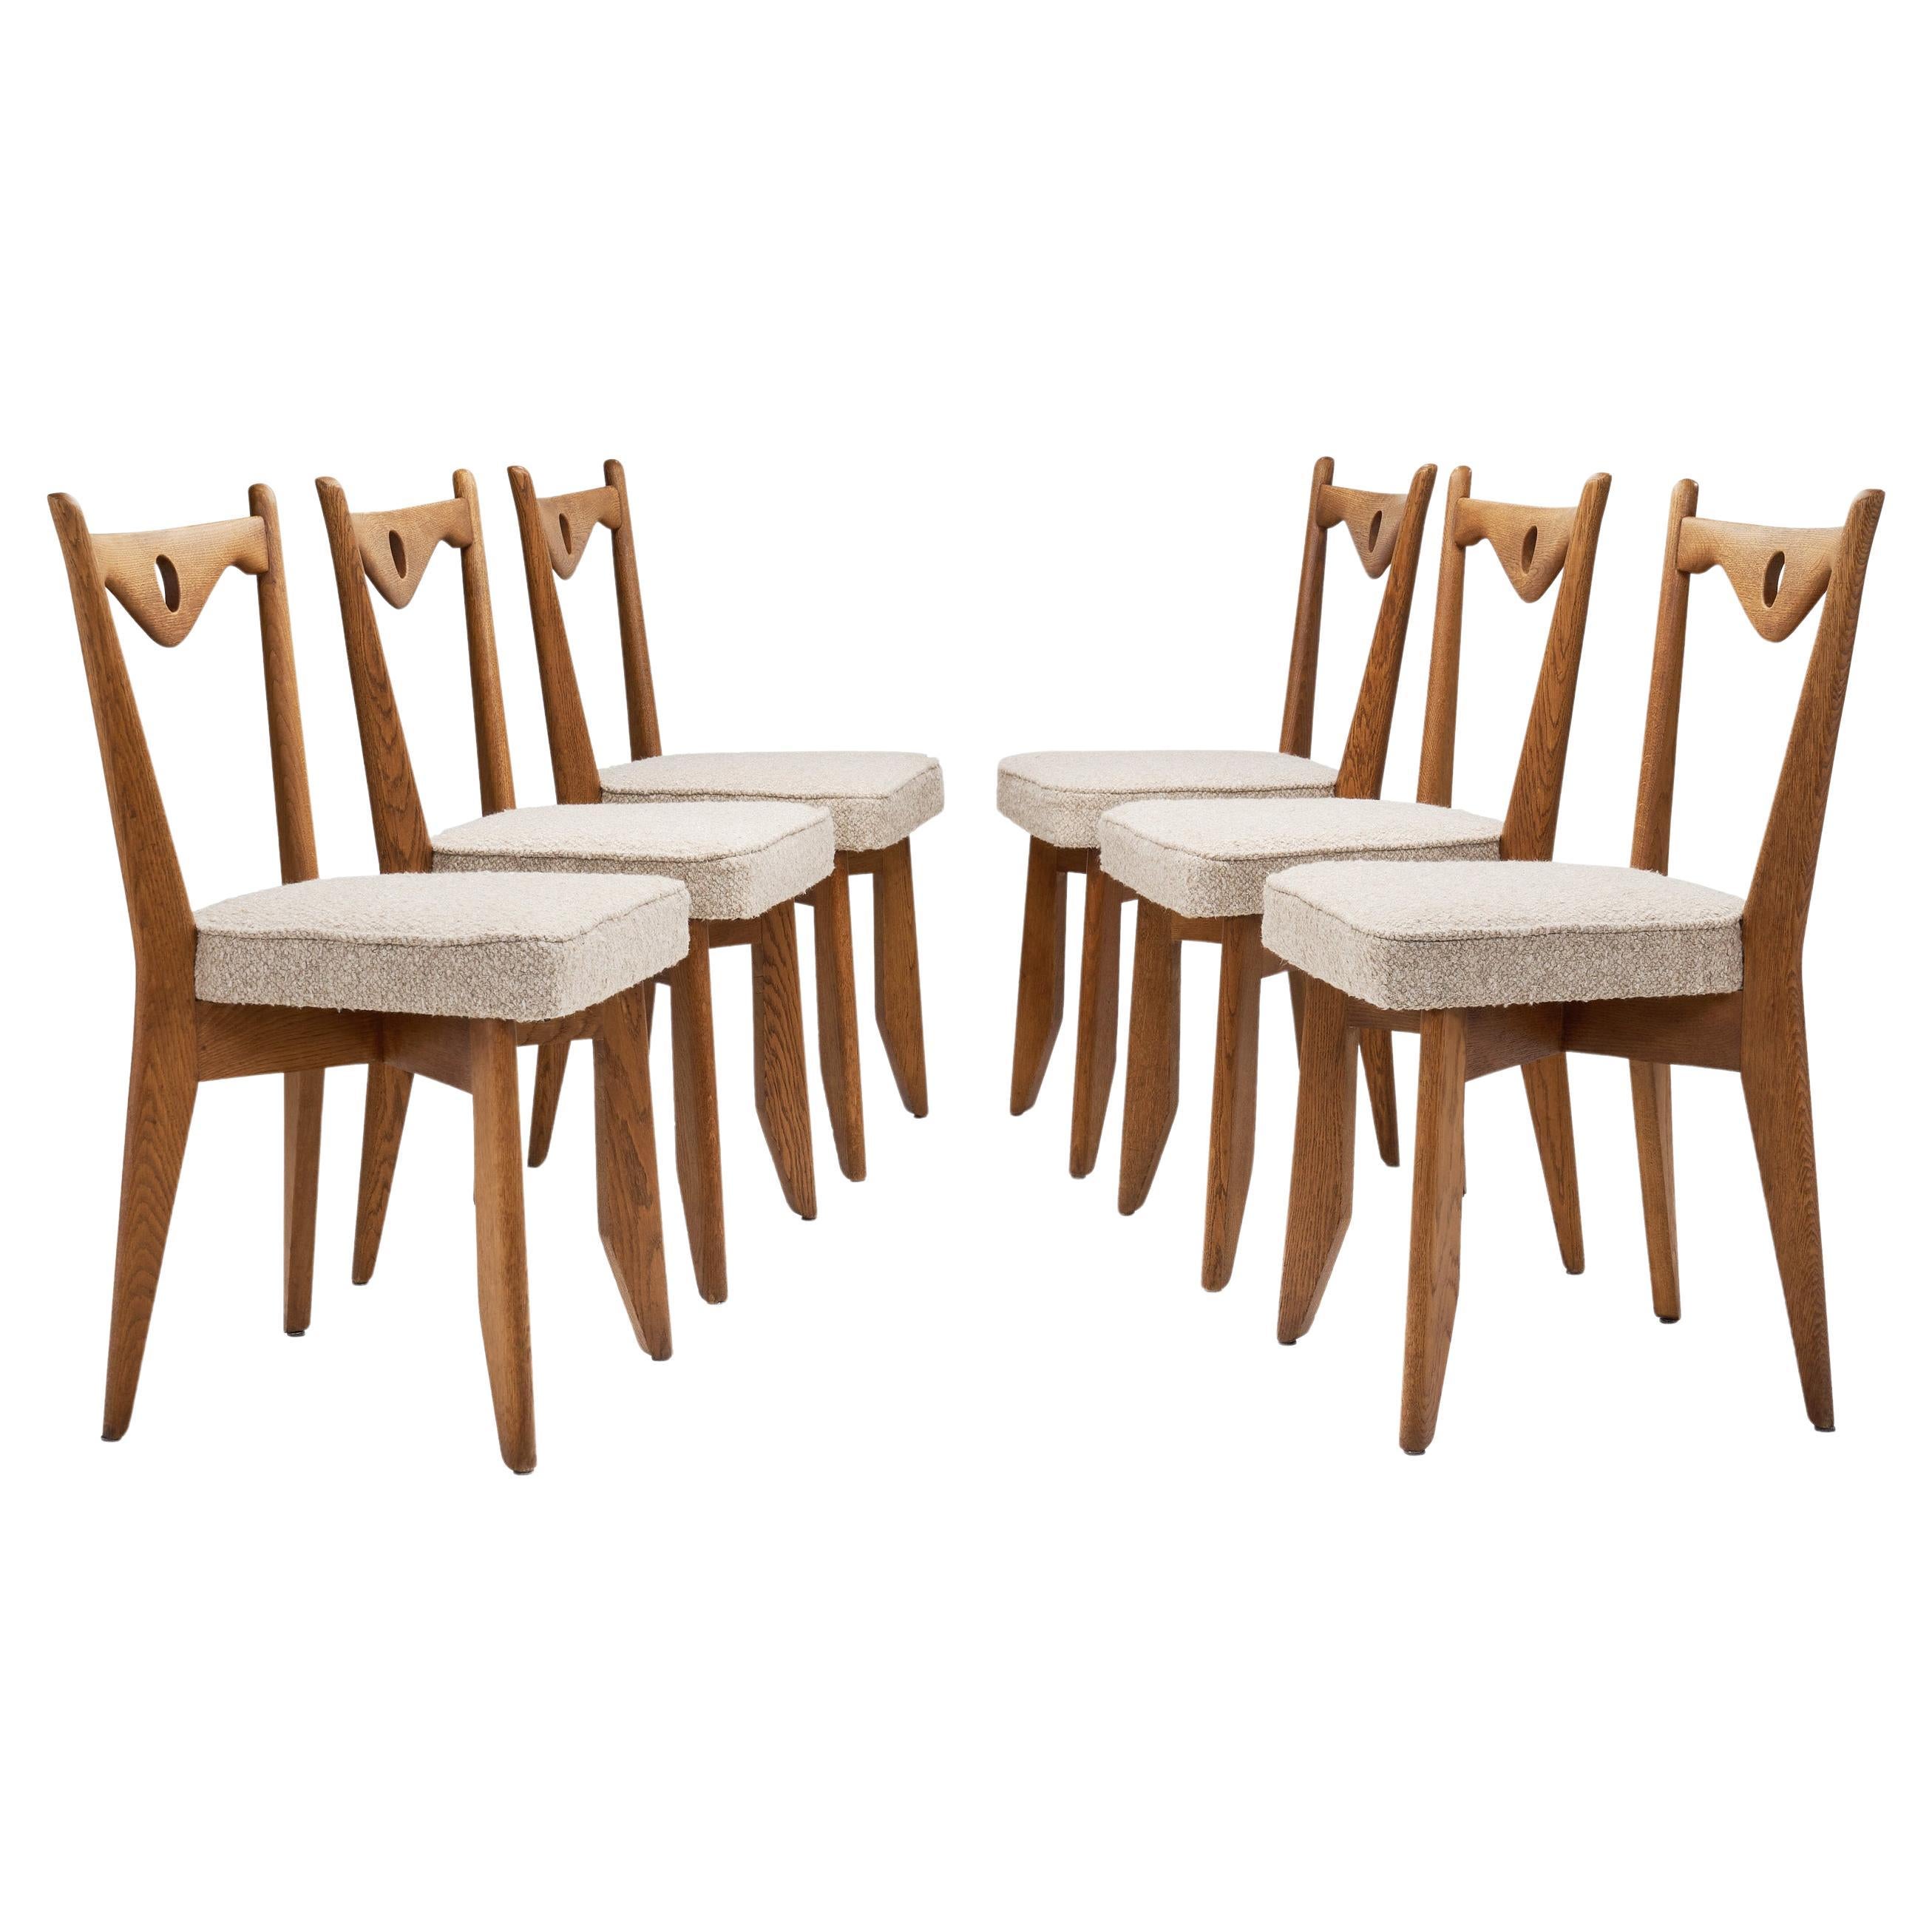 Guillerme et Chambron Rare Set of Oak Chairs with Seats in Bouclé, France 1960s For Sale